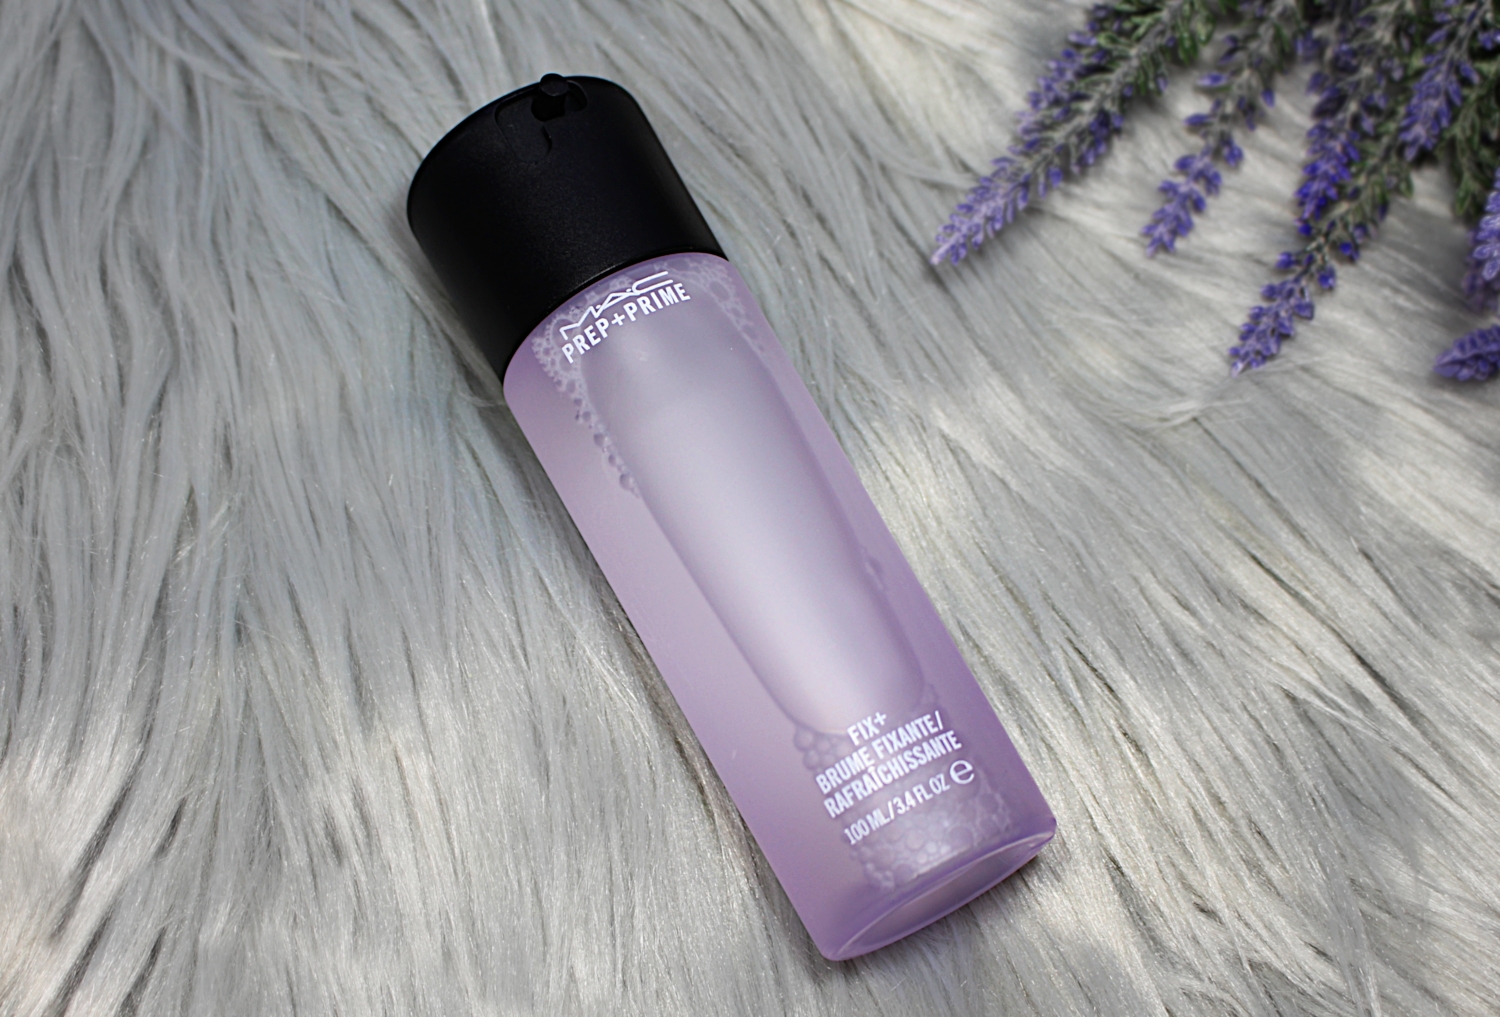 a closed bottle of Lavender Setting Mist by Mac Cosmetics is laying on a faux fur rug together with a branch of lavender flowers